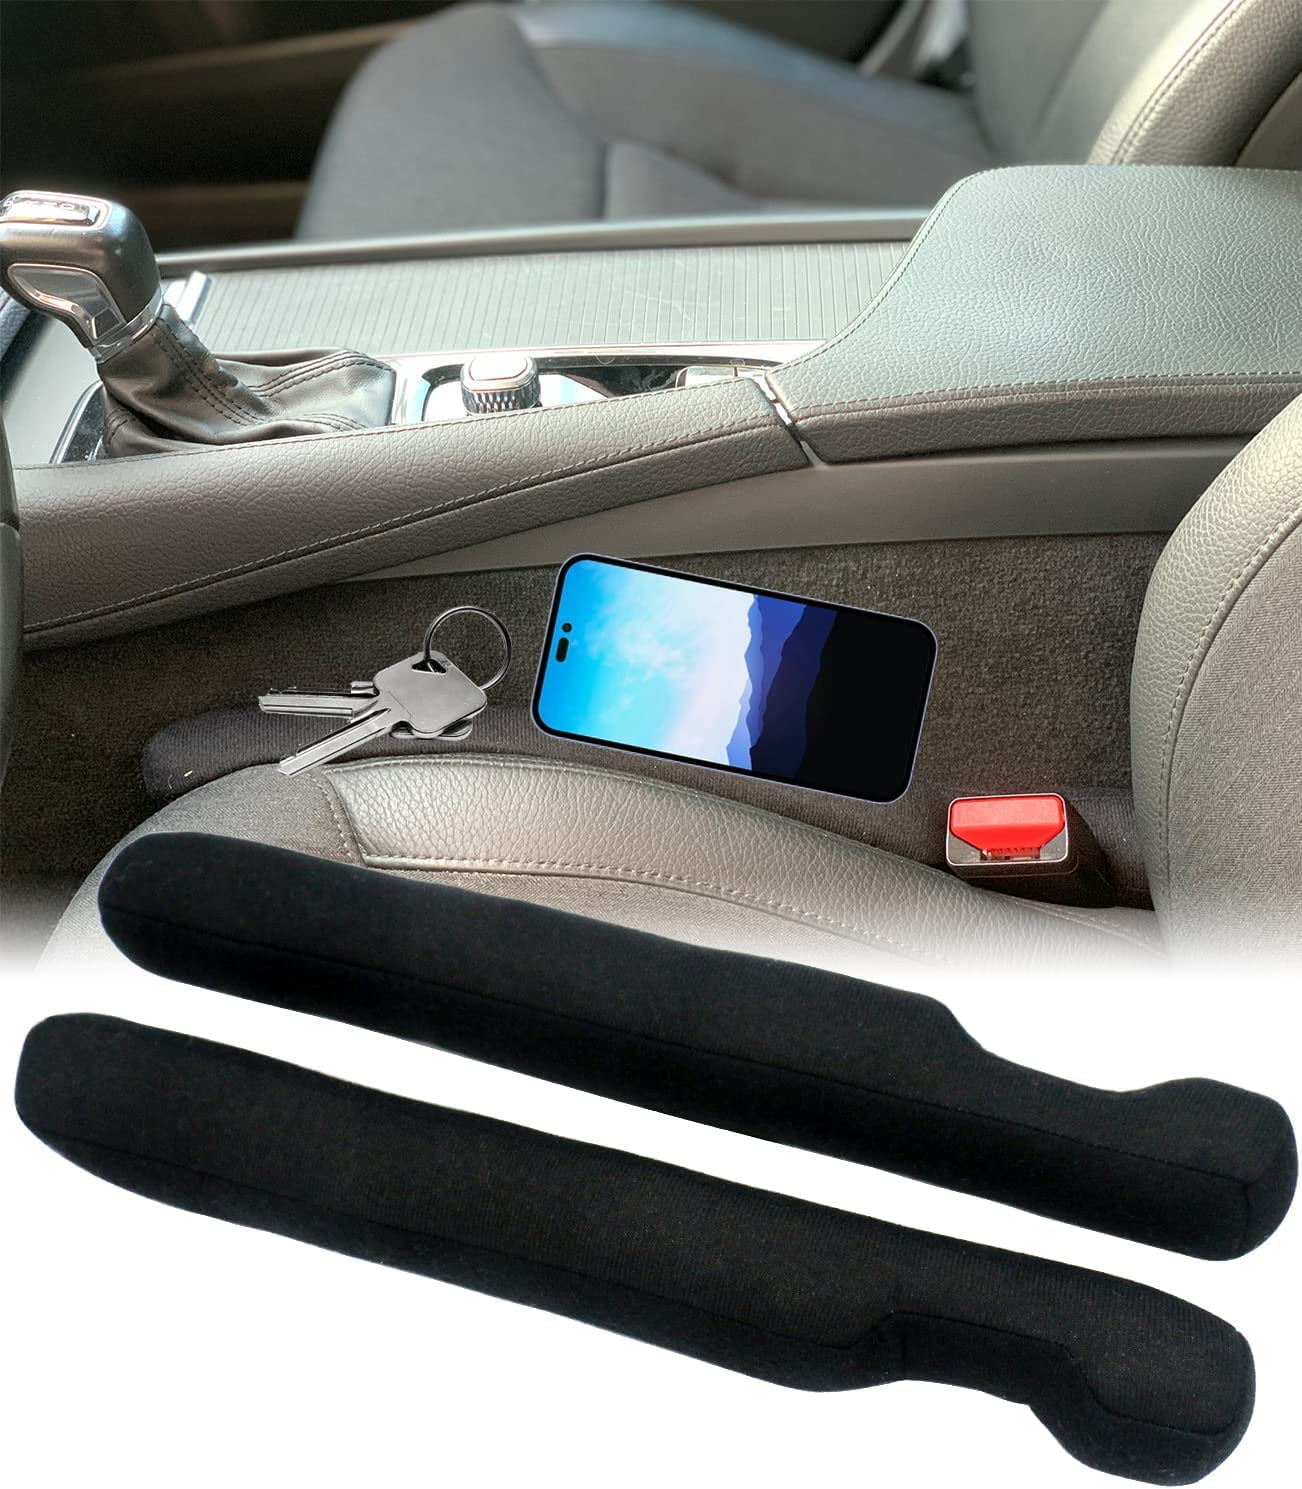 2pcs Car Seat Gap Fillers Fill The Gap Between Seat And Console